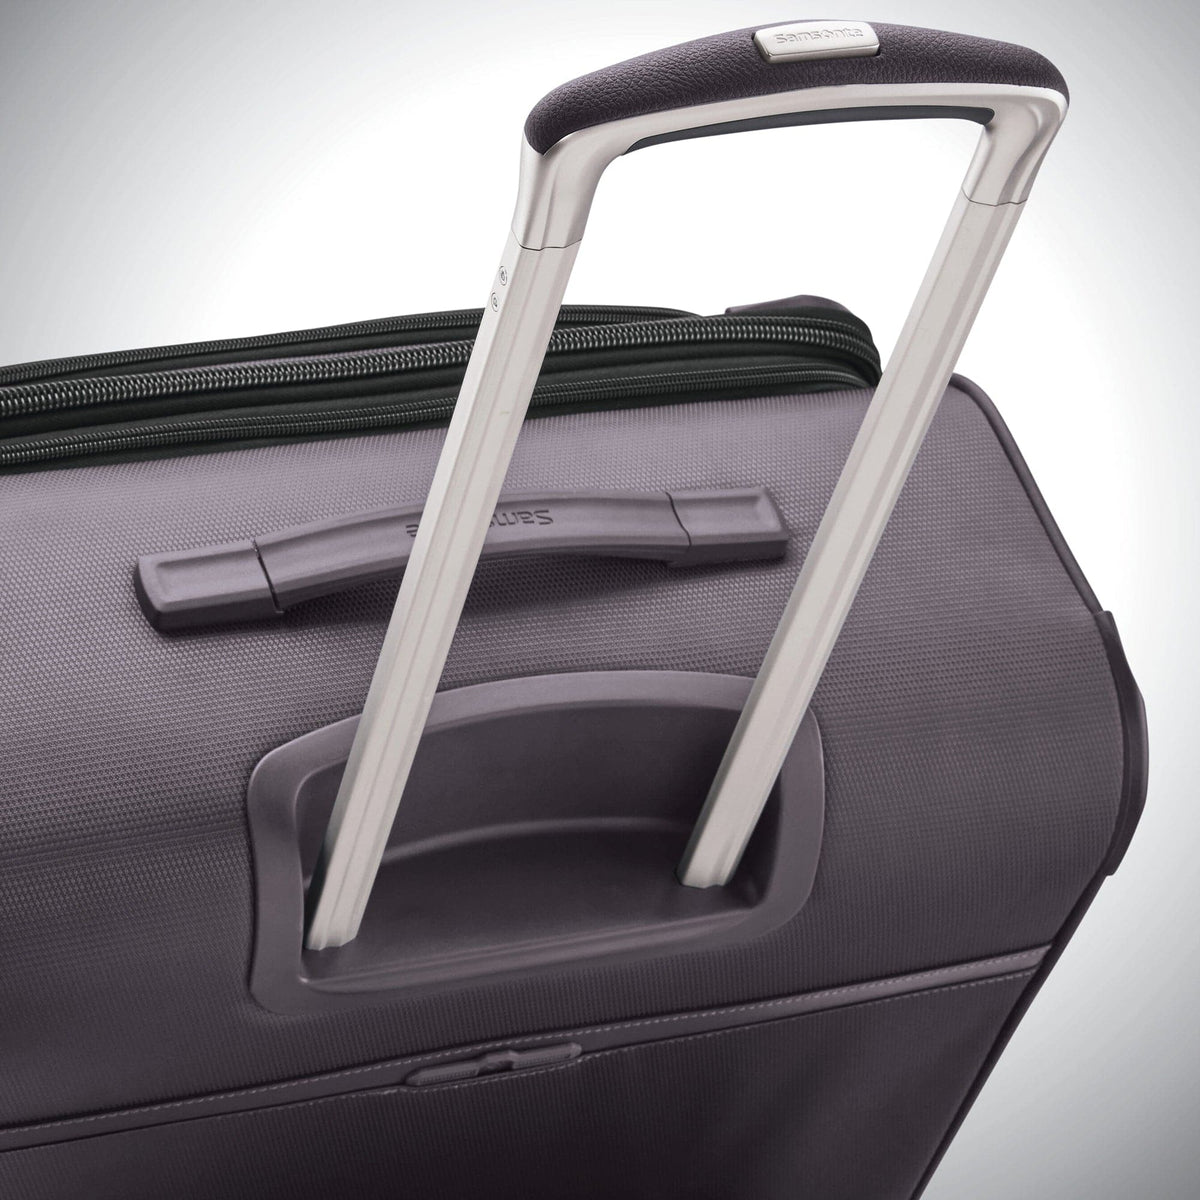 Samsonite SoLyte DLX Carry On Expandable Spinner Luggage